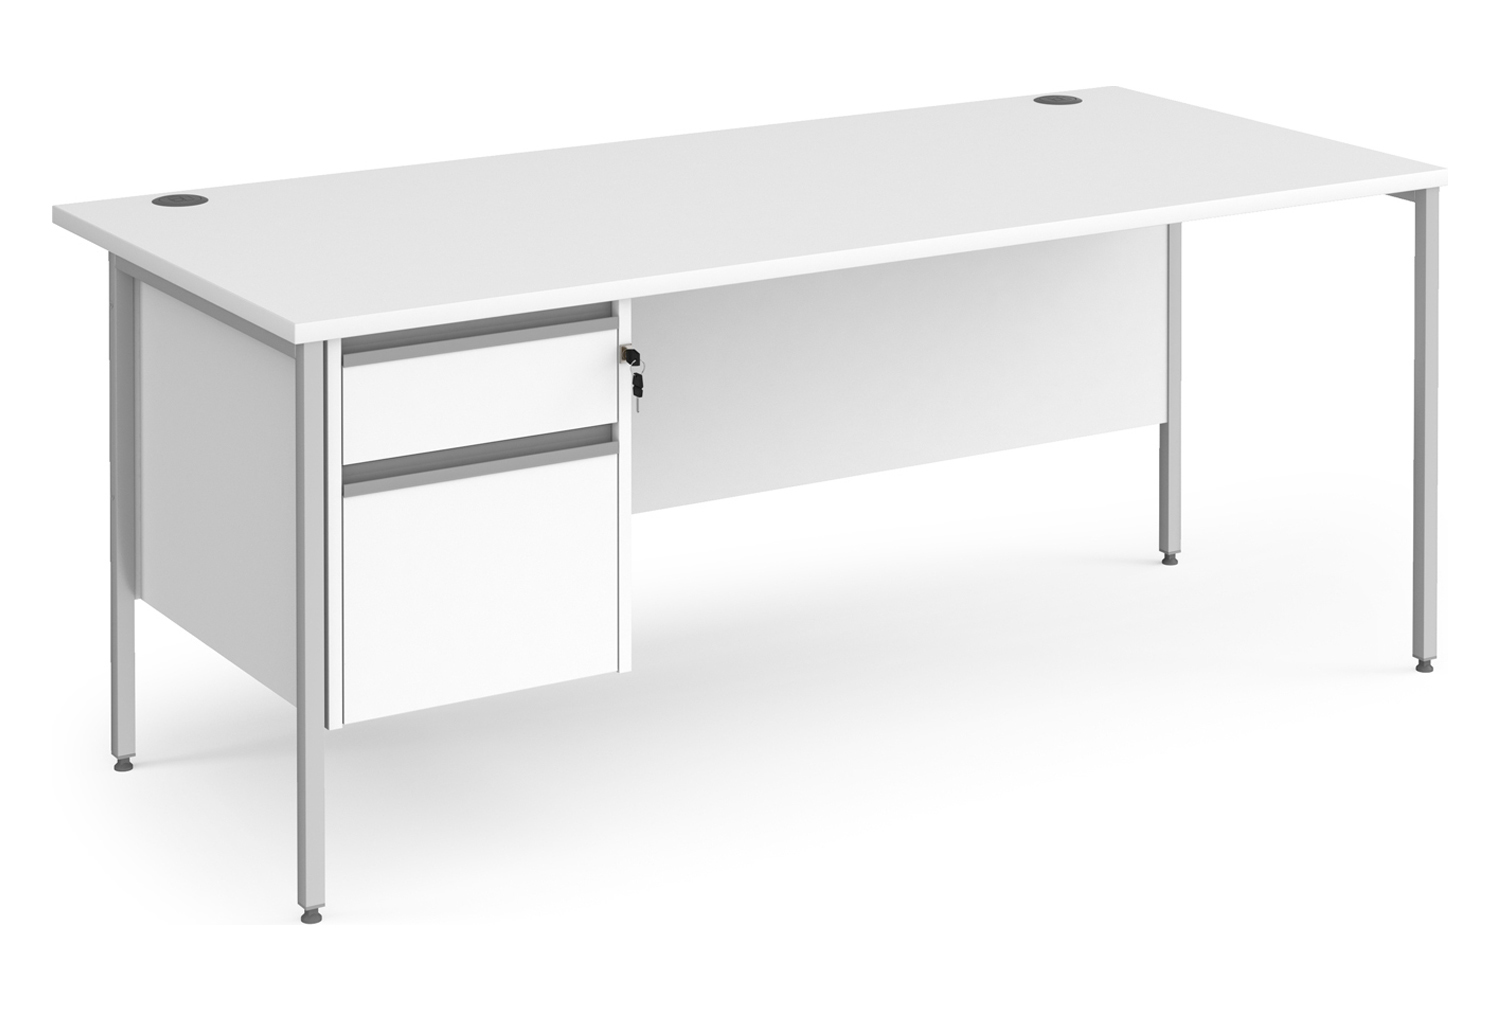 Value Line Classic+ Rectangular H-Leg Office Desk 2 Drawers (Silver Leg), 180wx80dx73h (cm), White, Express Delivery